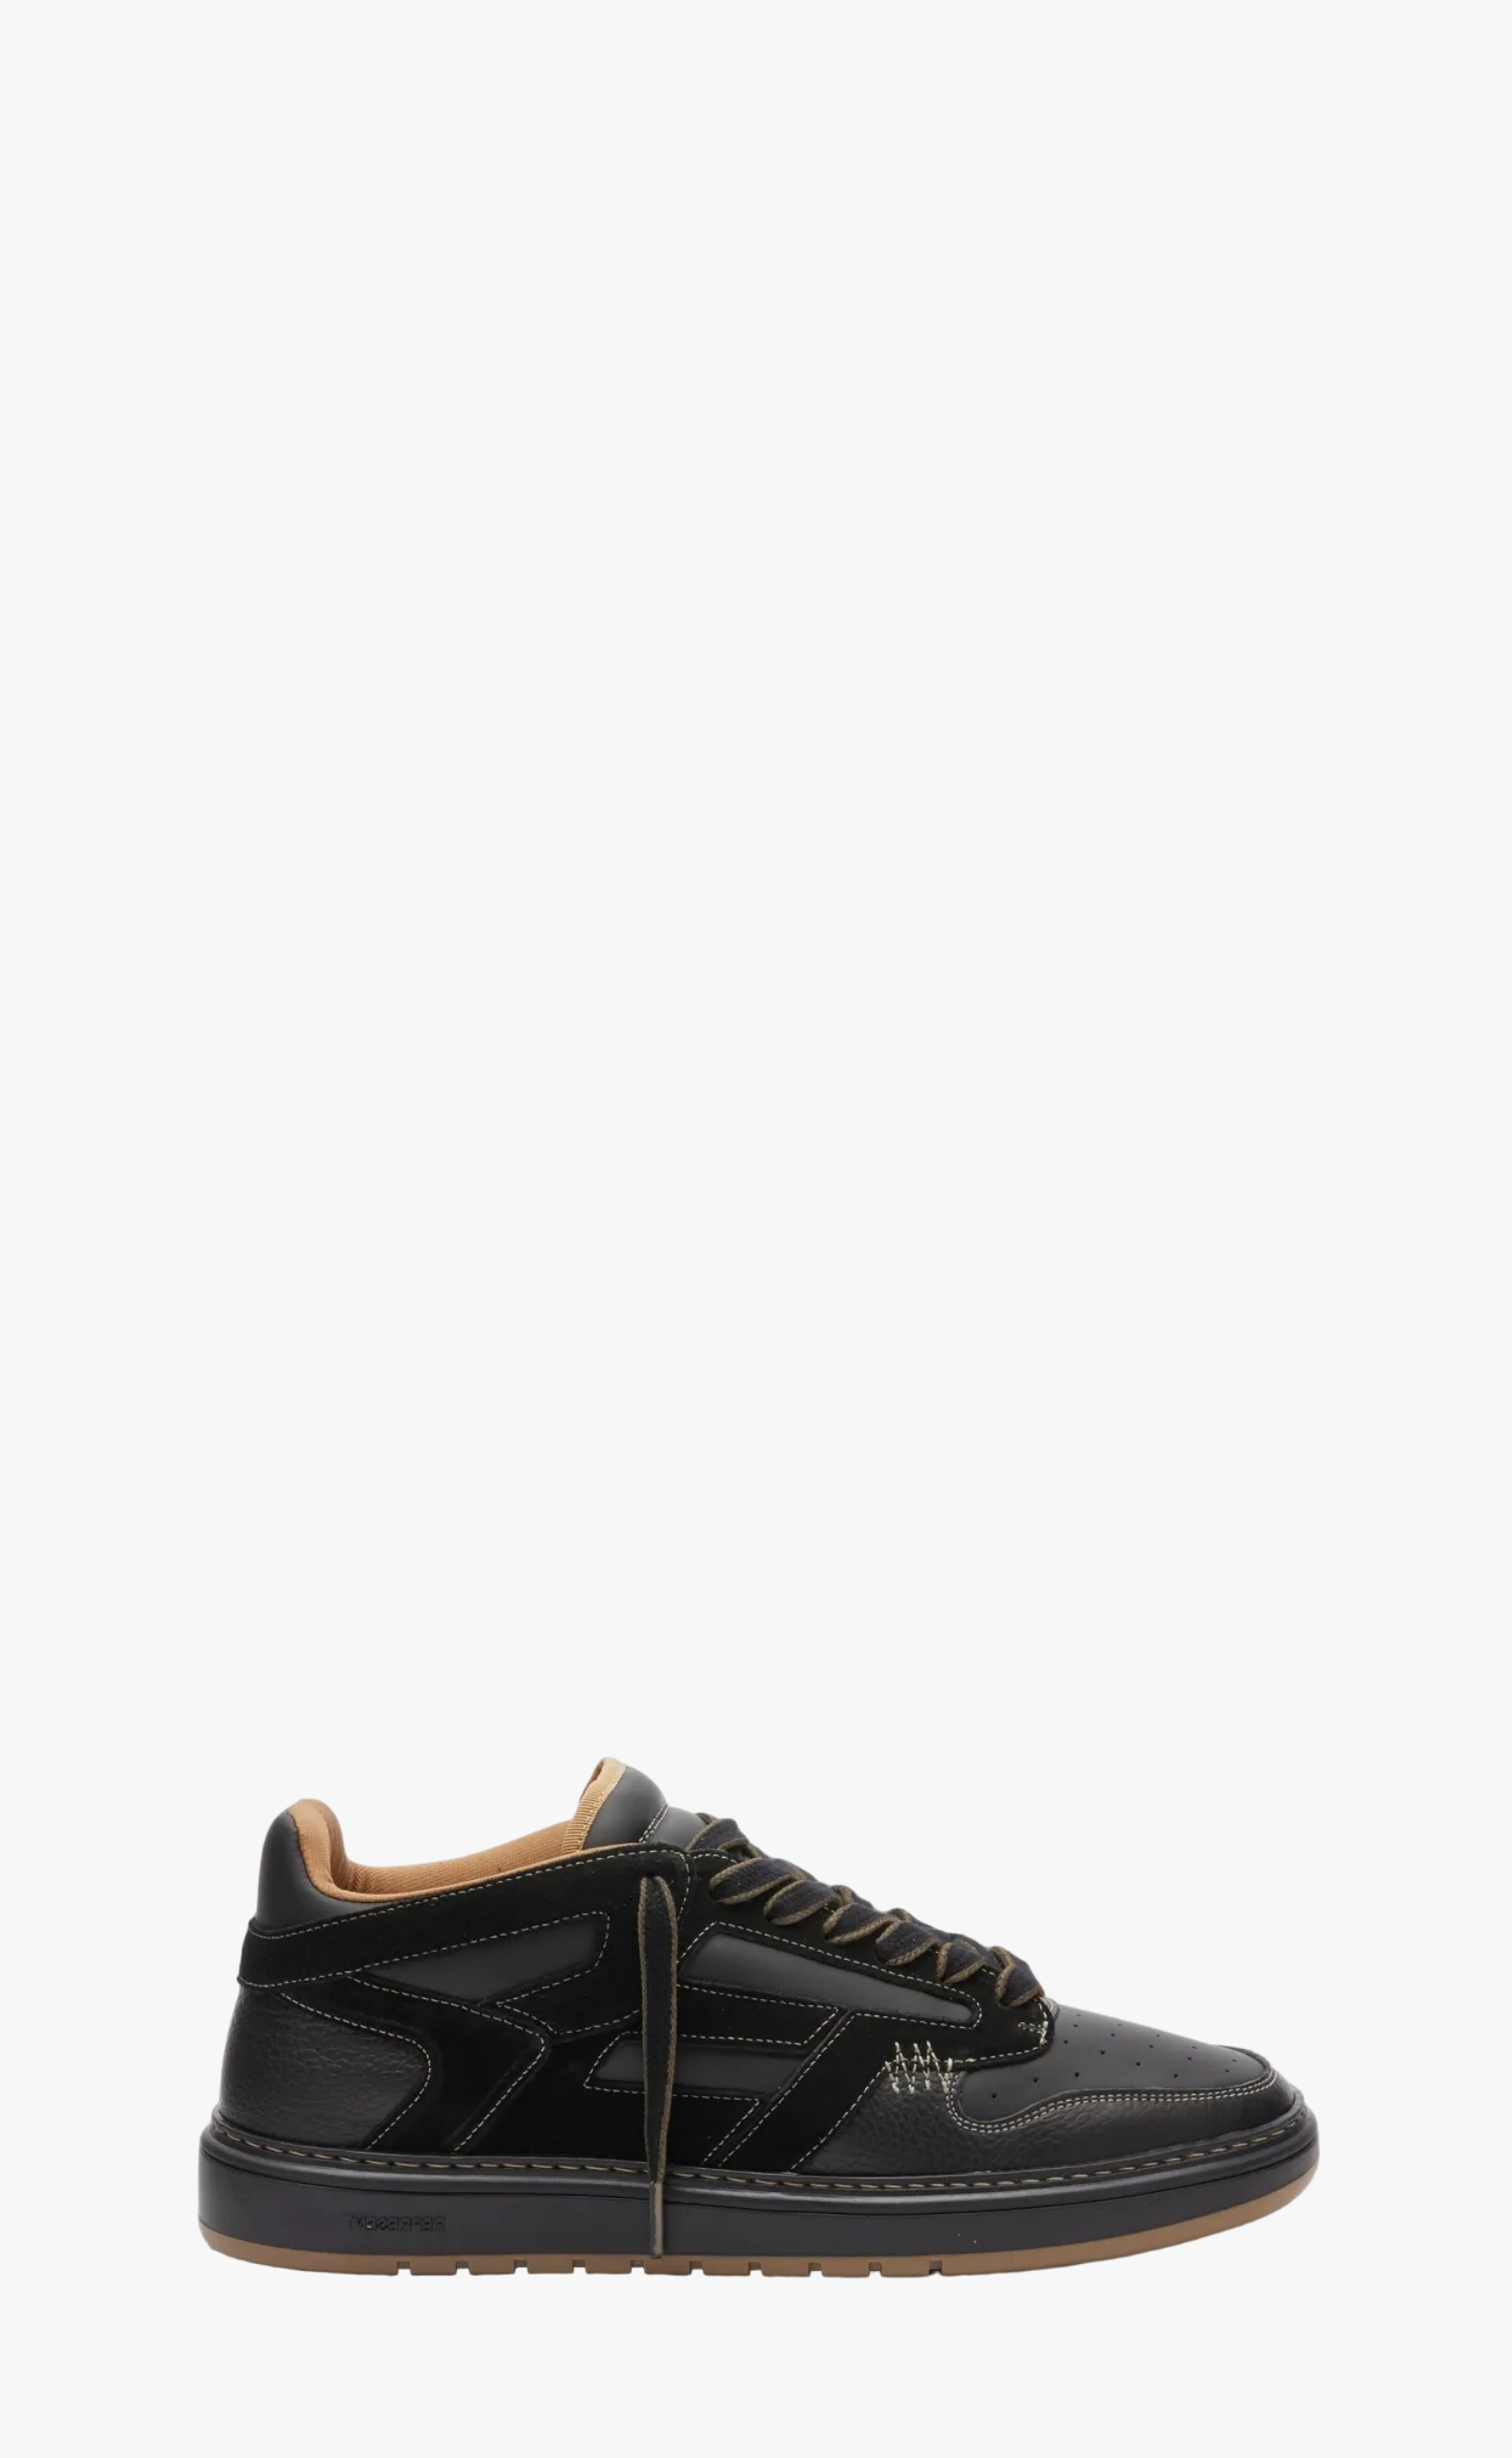 REPTOR LOW BLACK WASHED TAUPE SNEAKERS